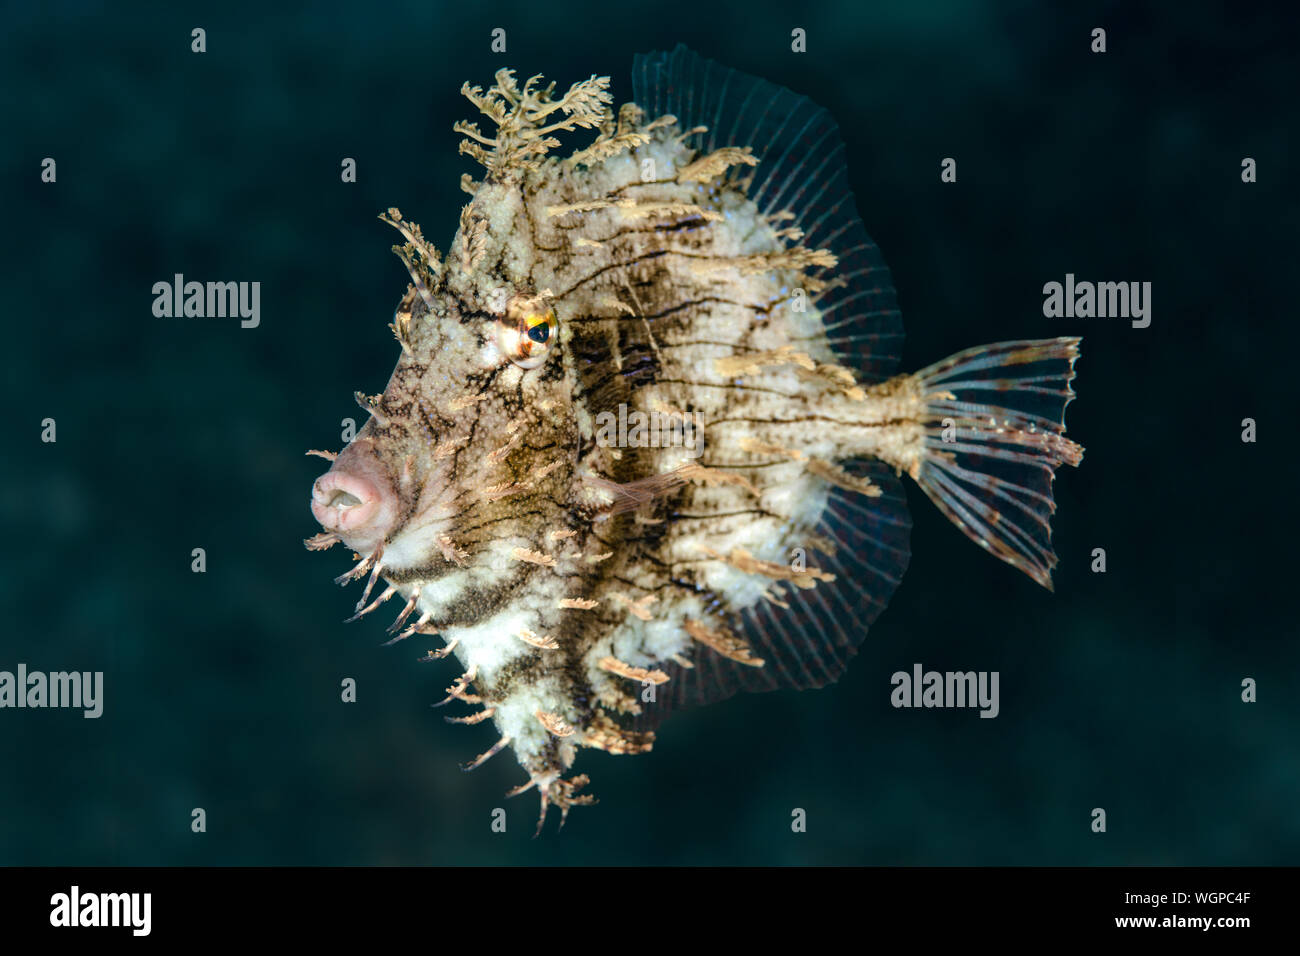 A beautiful filefish hovers near an underwater artificial reef and has its flaps all extended. When it is swimming, the fish is smooth. Stock Photo